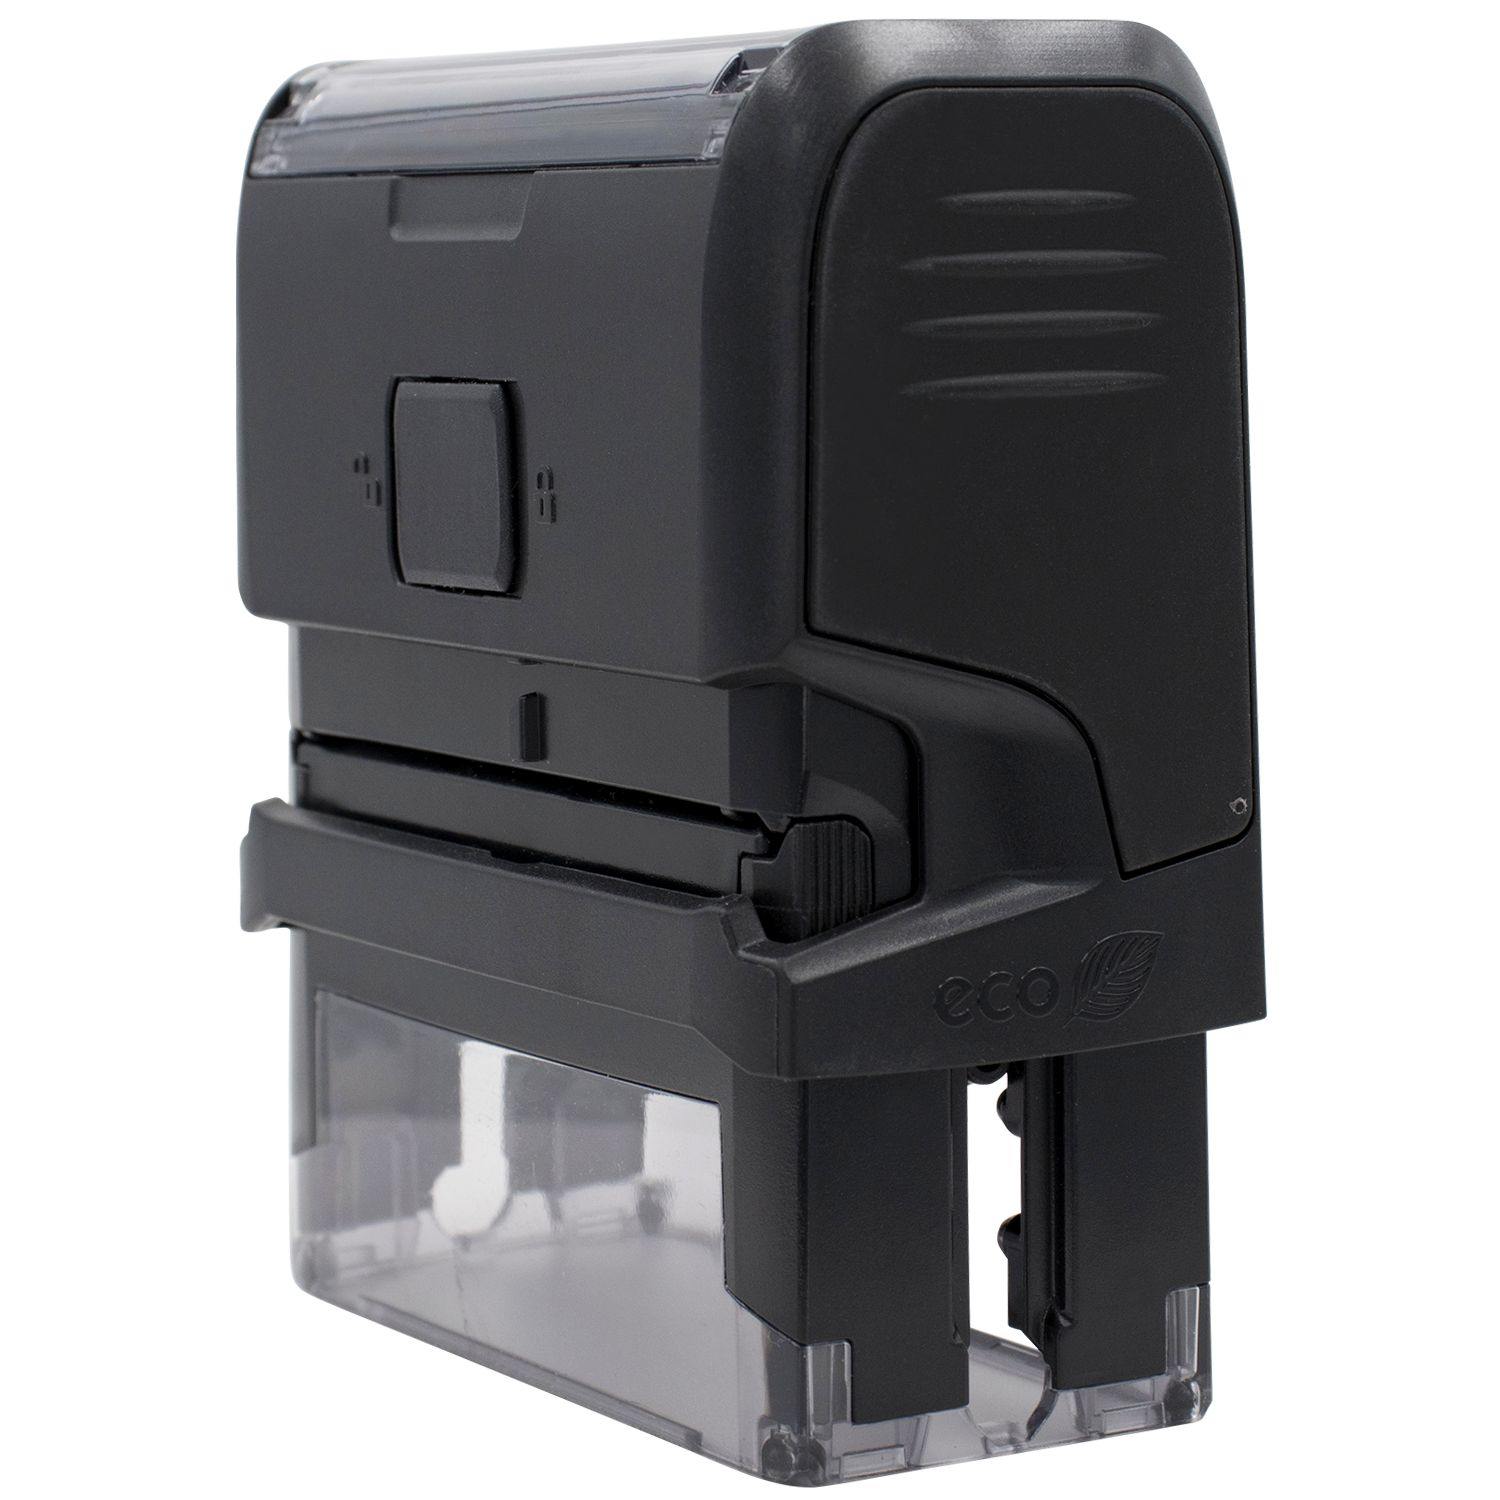 Self Inking Secondary Insurance Stamp - Engineer Seal Stamps - Brand_Trodat, Impression Size_Small, Stamp Type_Self-Inking Stamp, Type of Use_Medical Office